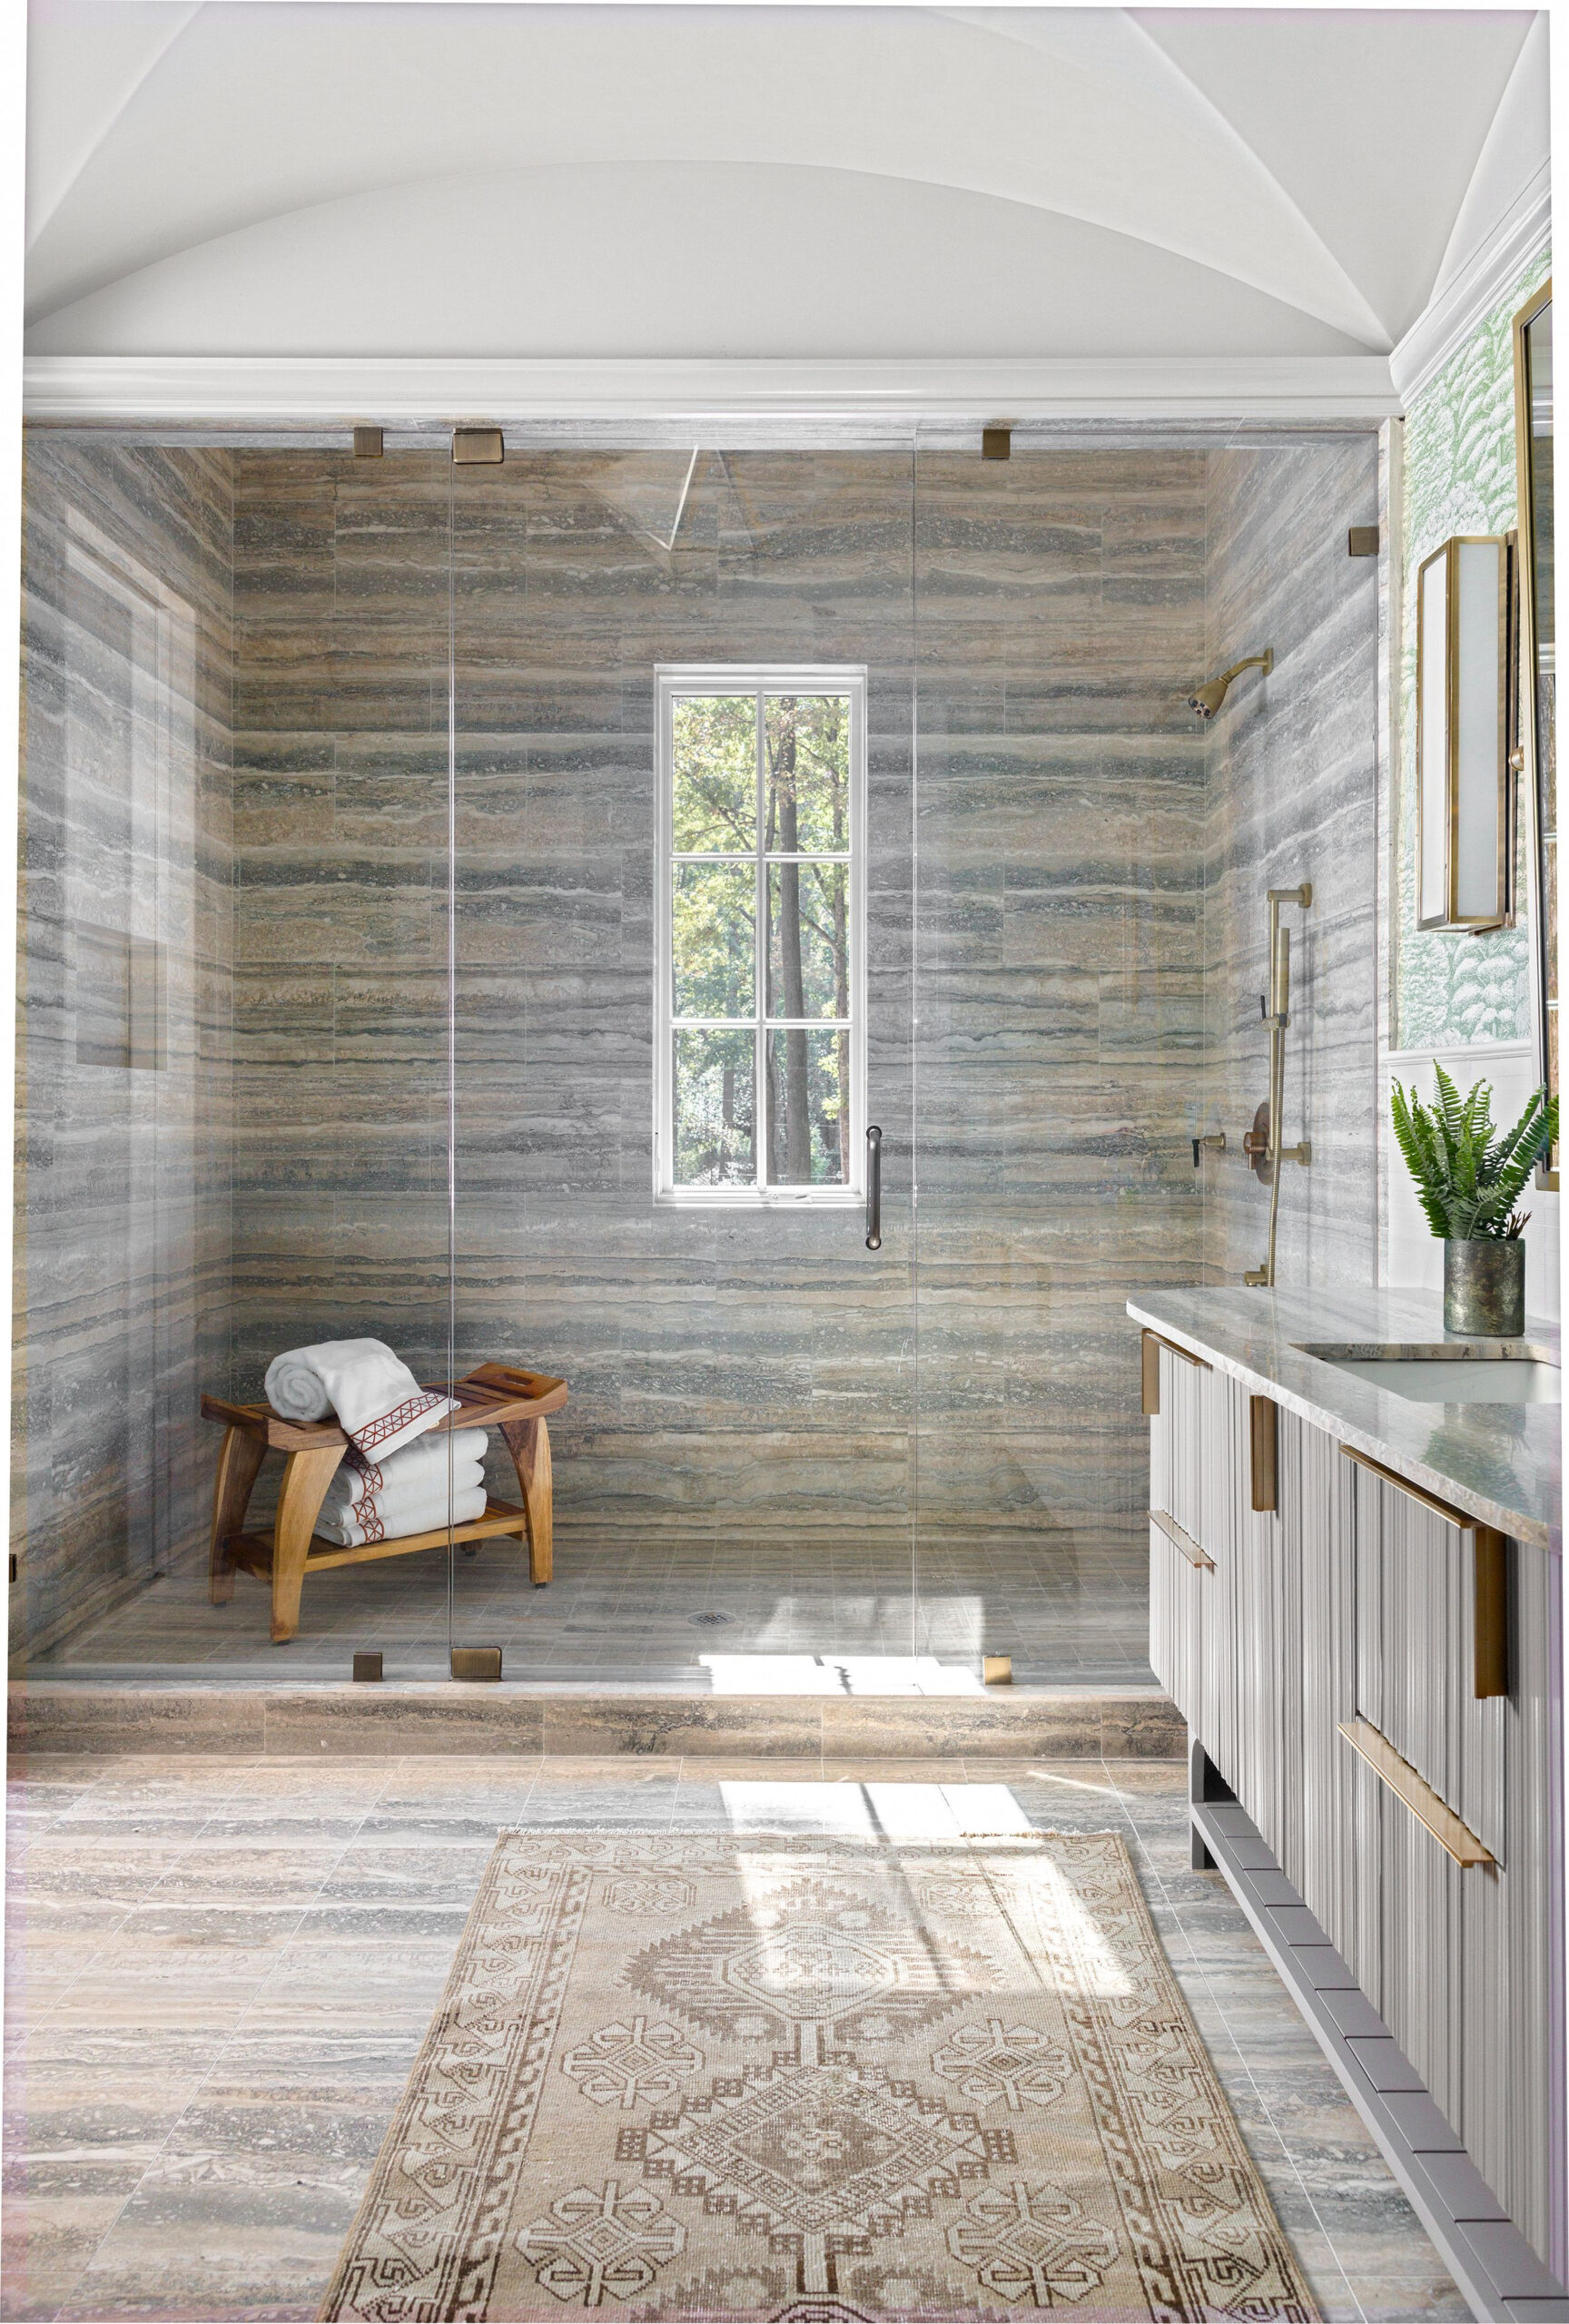 Bathroom Trends for : The Design Trends for The Bath Next Year